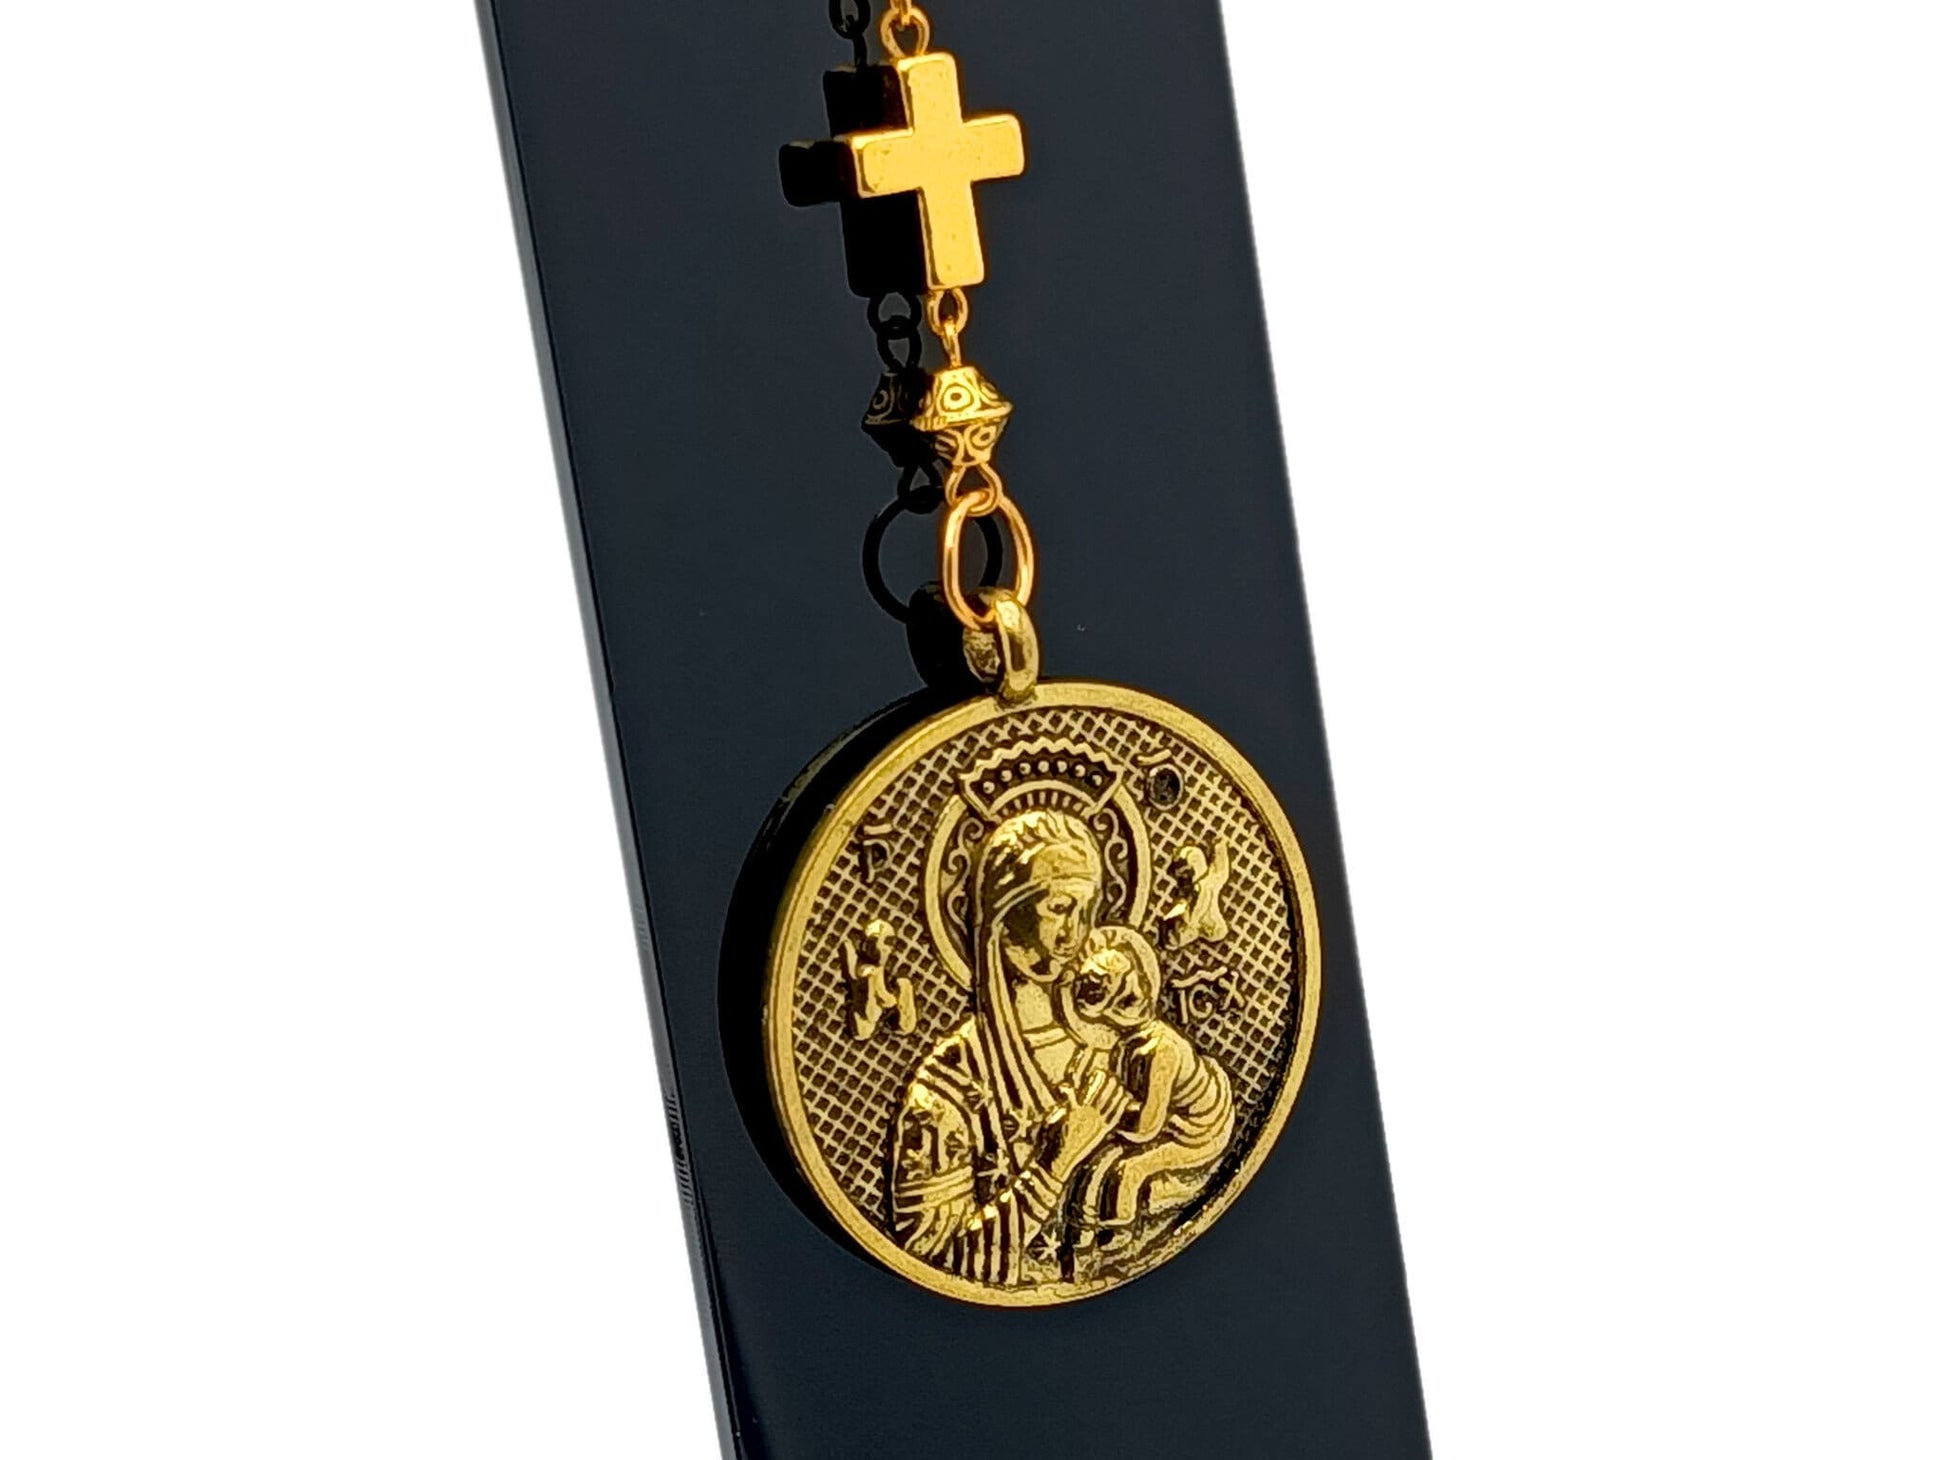 Antique gold Our Lady of Perpetual Help unique rosary beads purse clip key chain with linking gold cross.